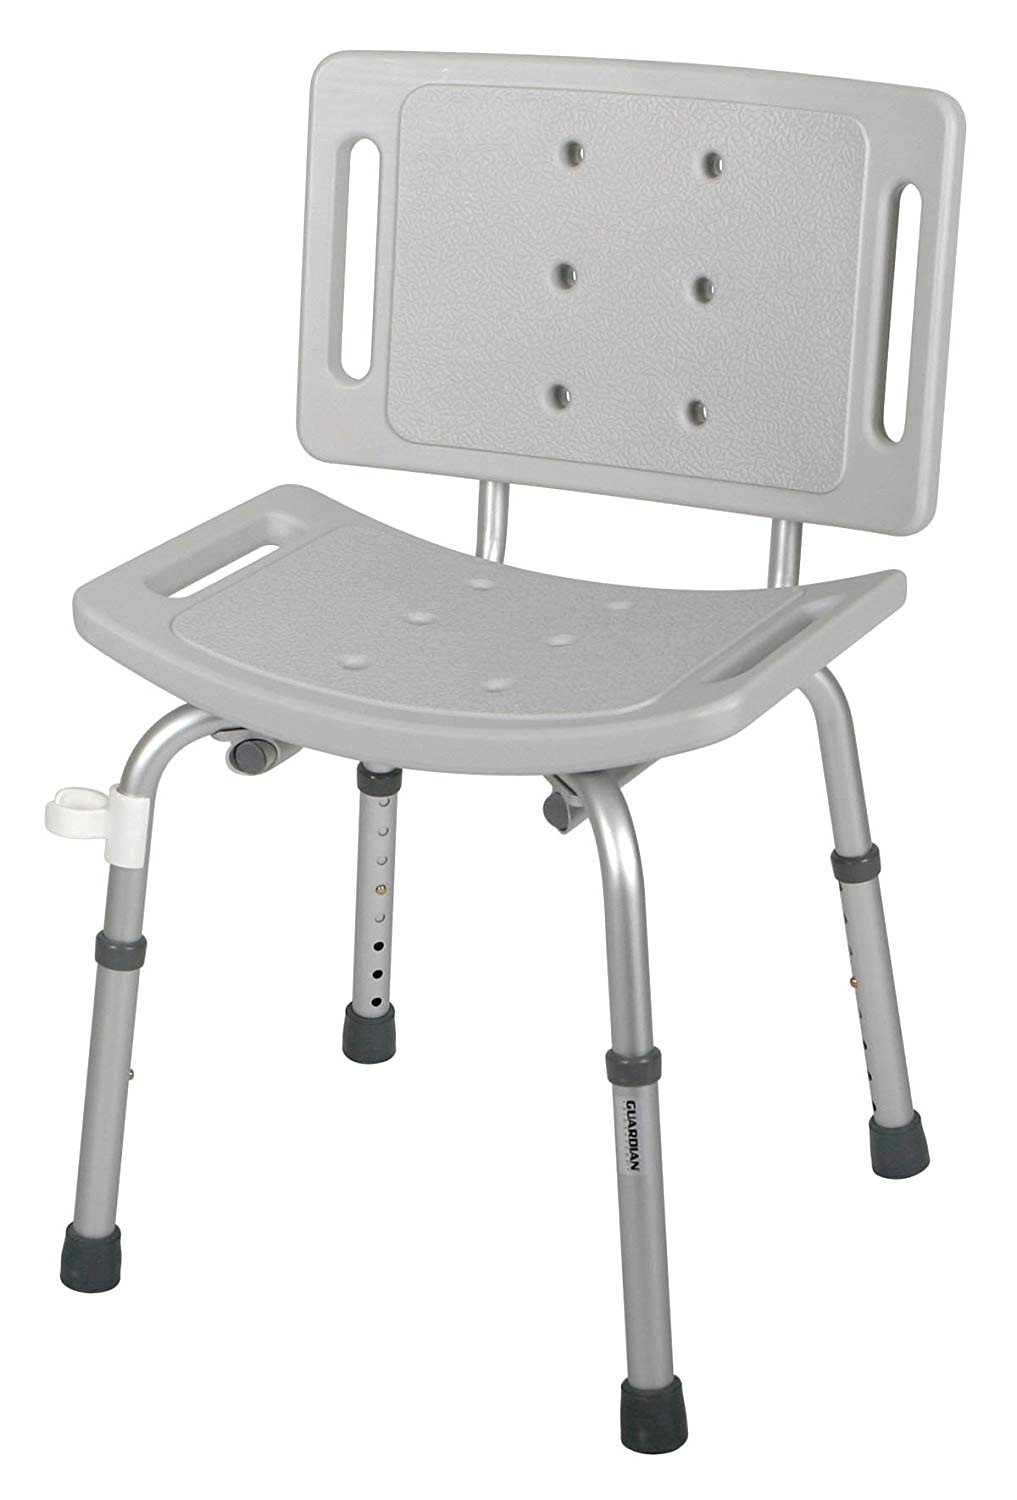 Bath Chair Photos Free Download PNG HQ PNG Image